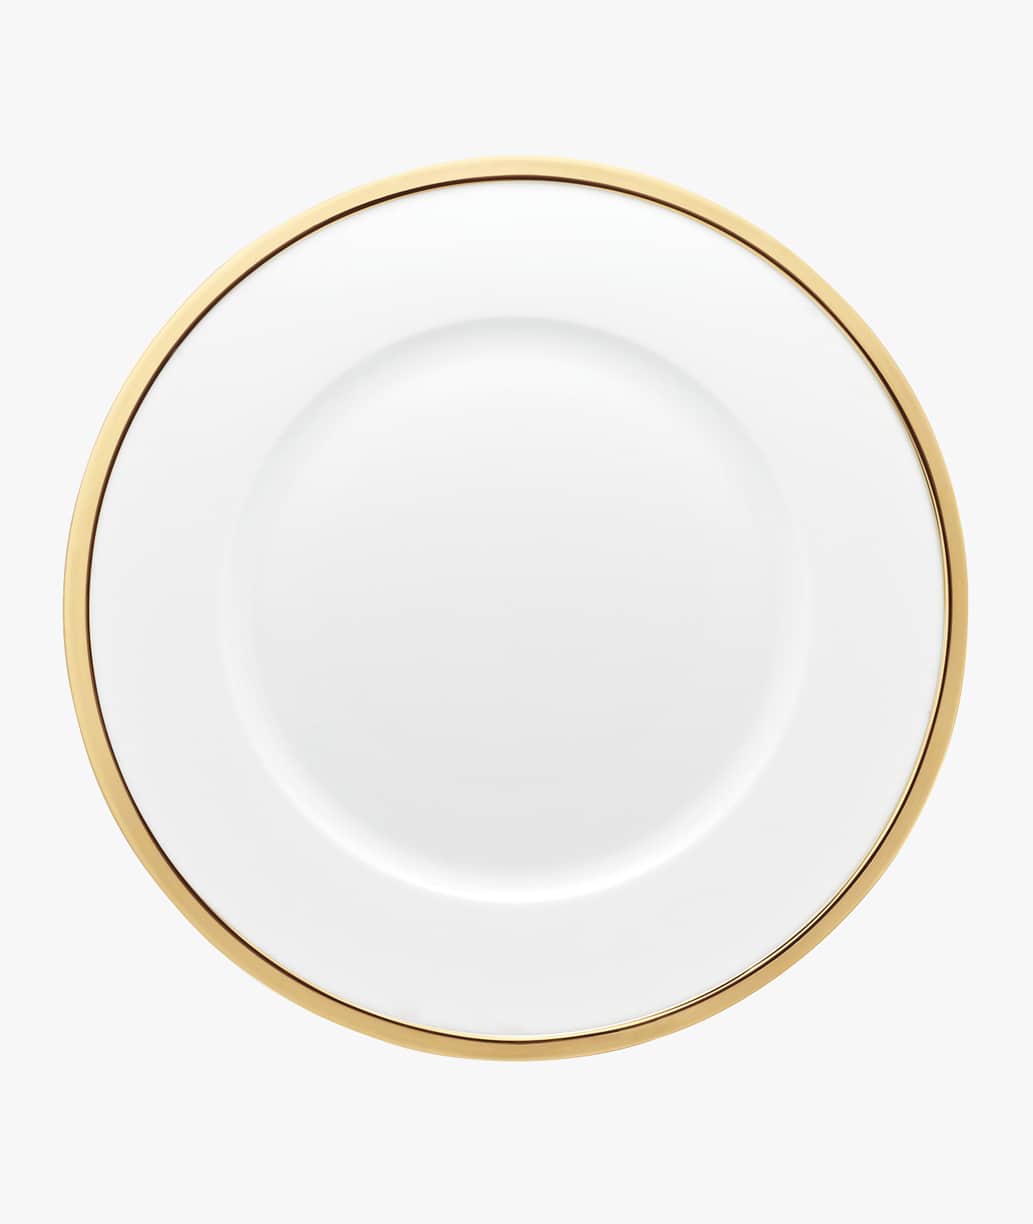 Puiforcat Cercle d'orfèvre collection in porcelain and sterling silver - american plate with a gold gilt finish